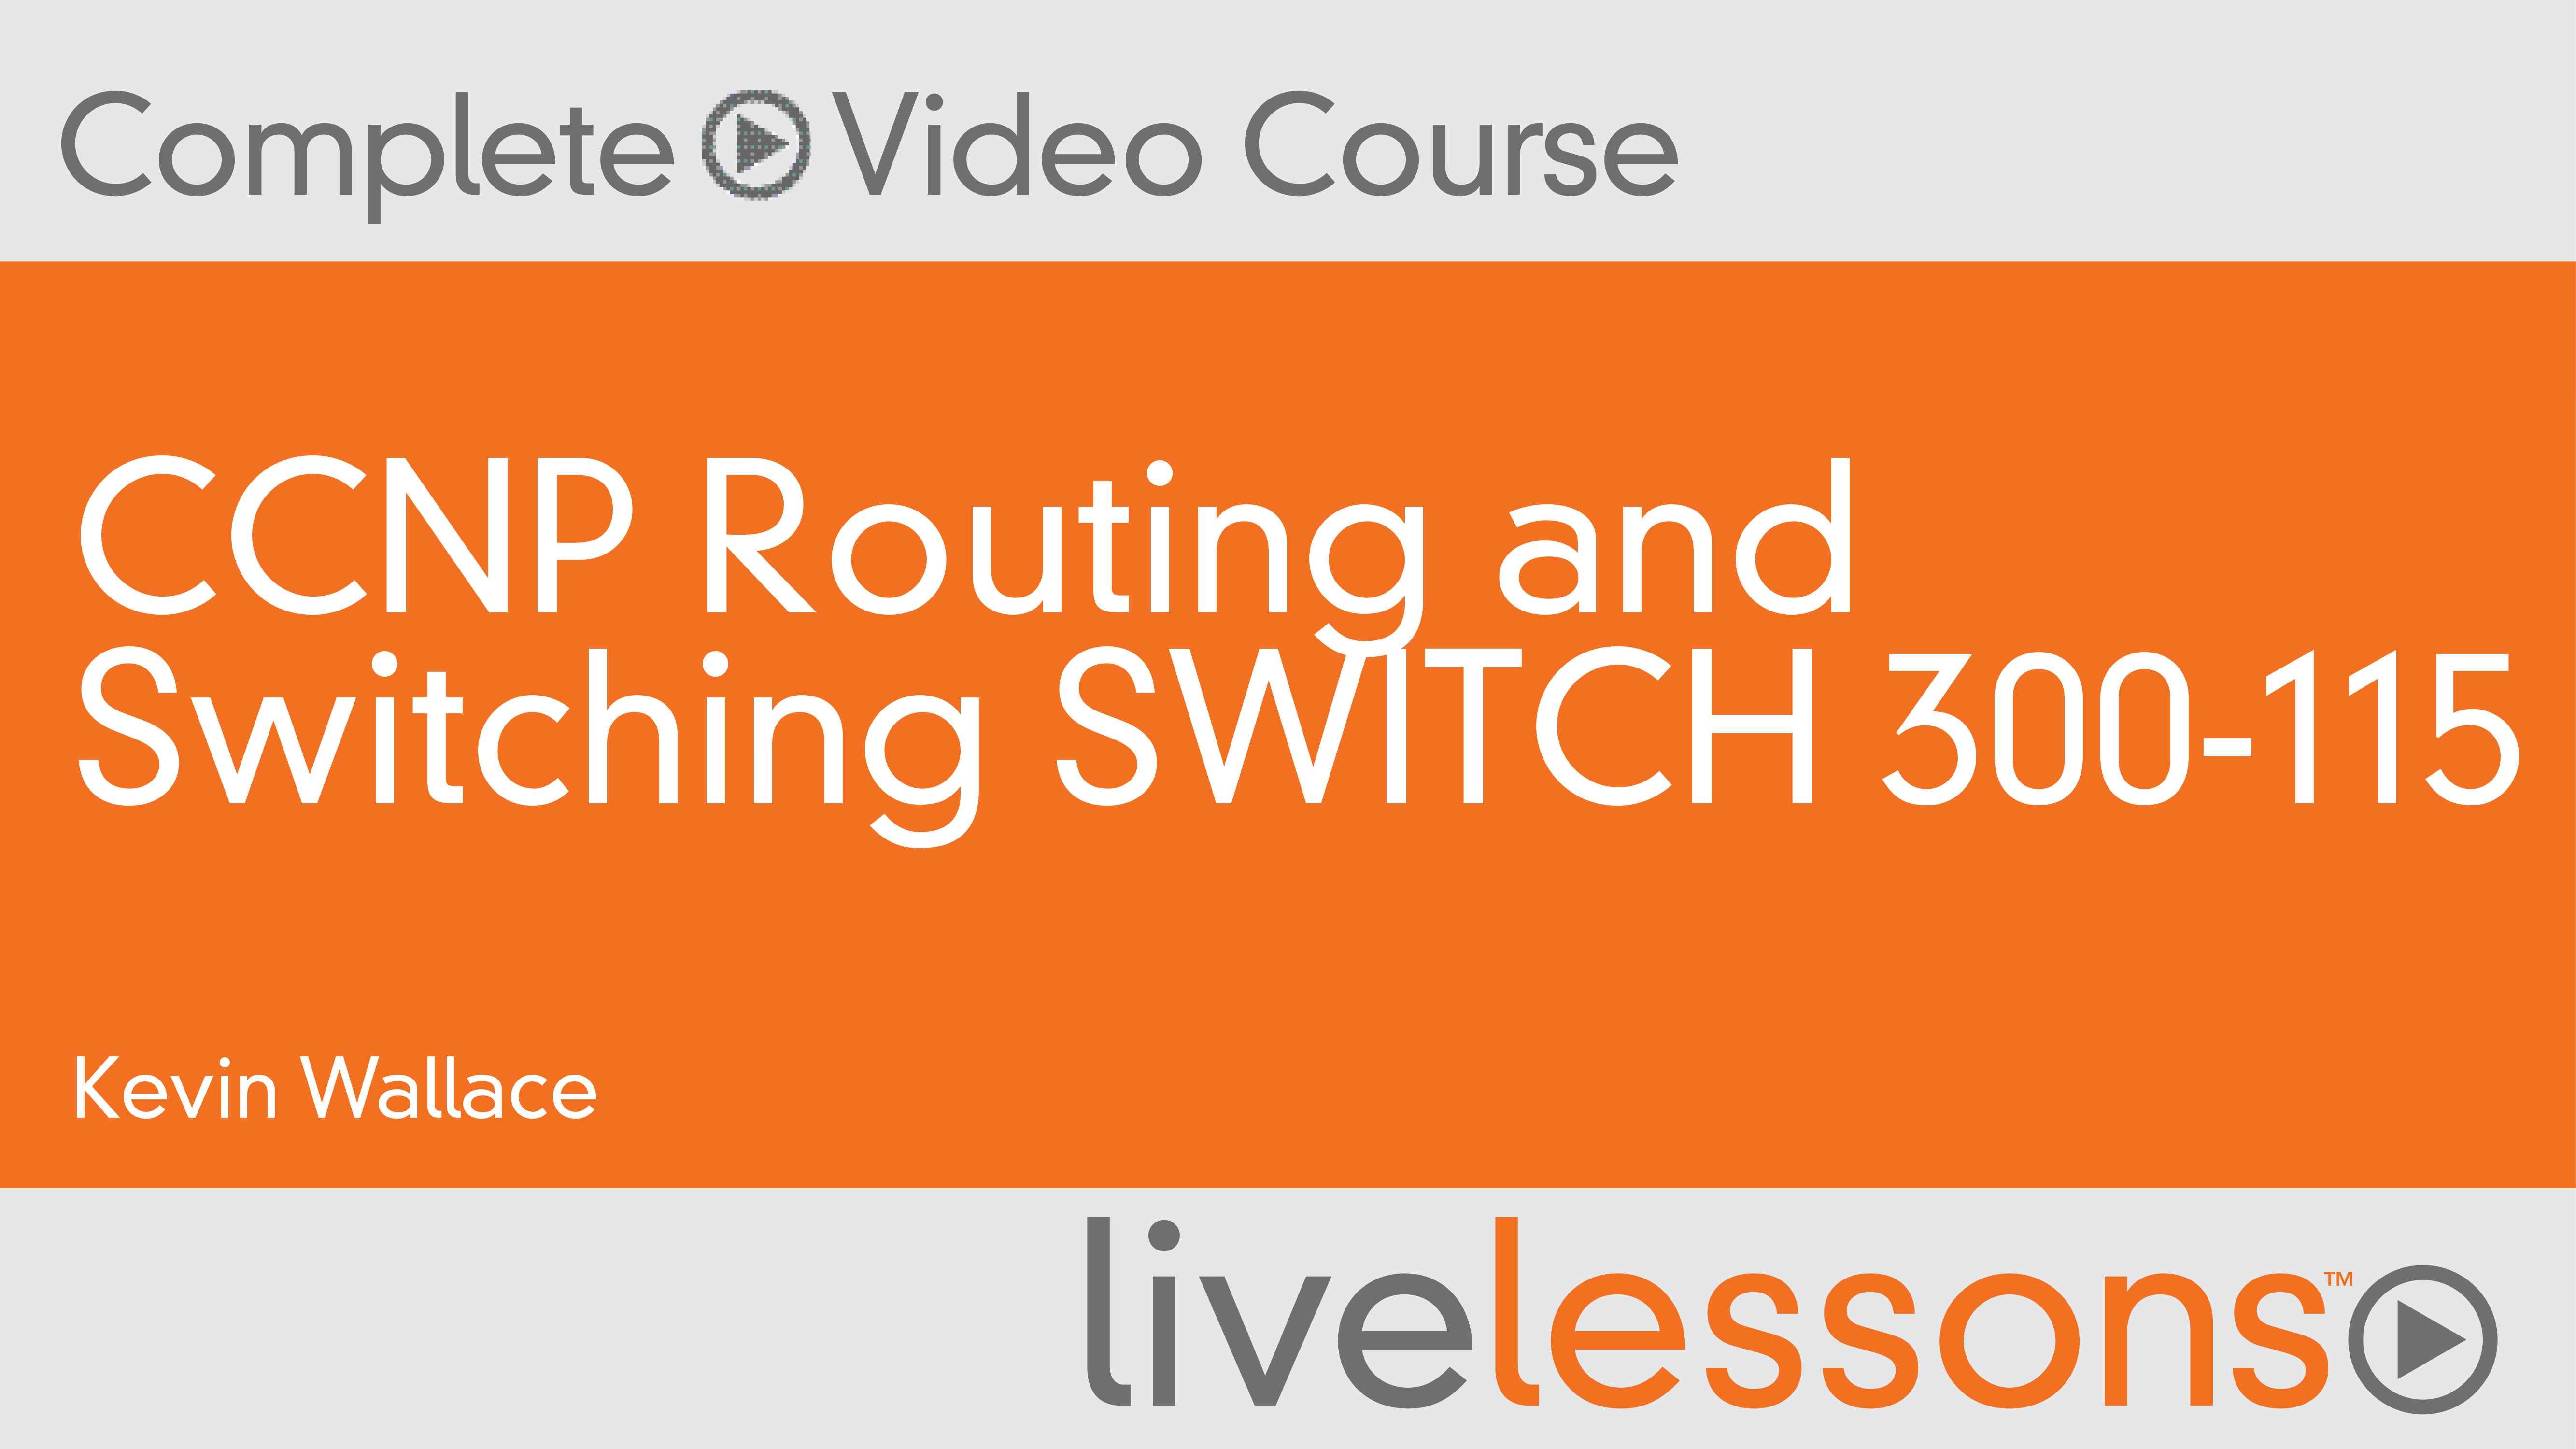 CCNP Routing and Switching SWITCH 300-115 Complete Video Course